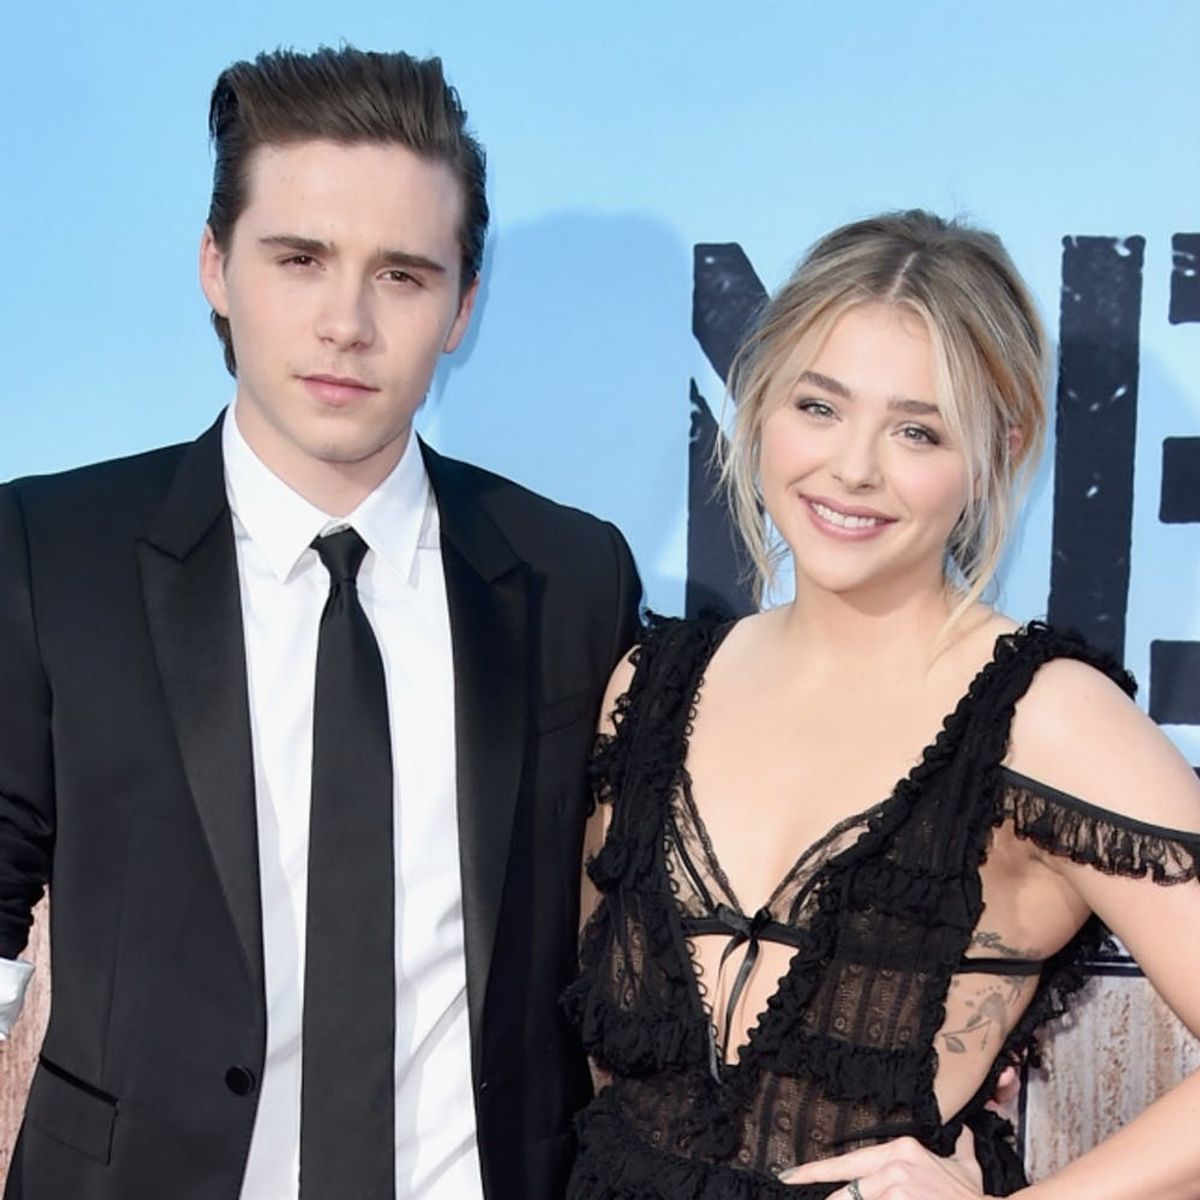 Brooklyn Beckham’s Love Note to Chloe Grace Moretz Will Make You Smile